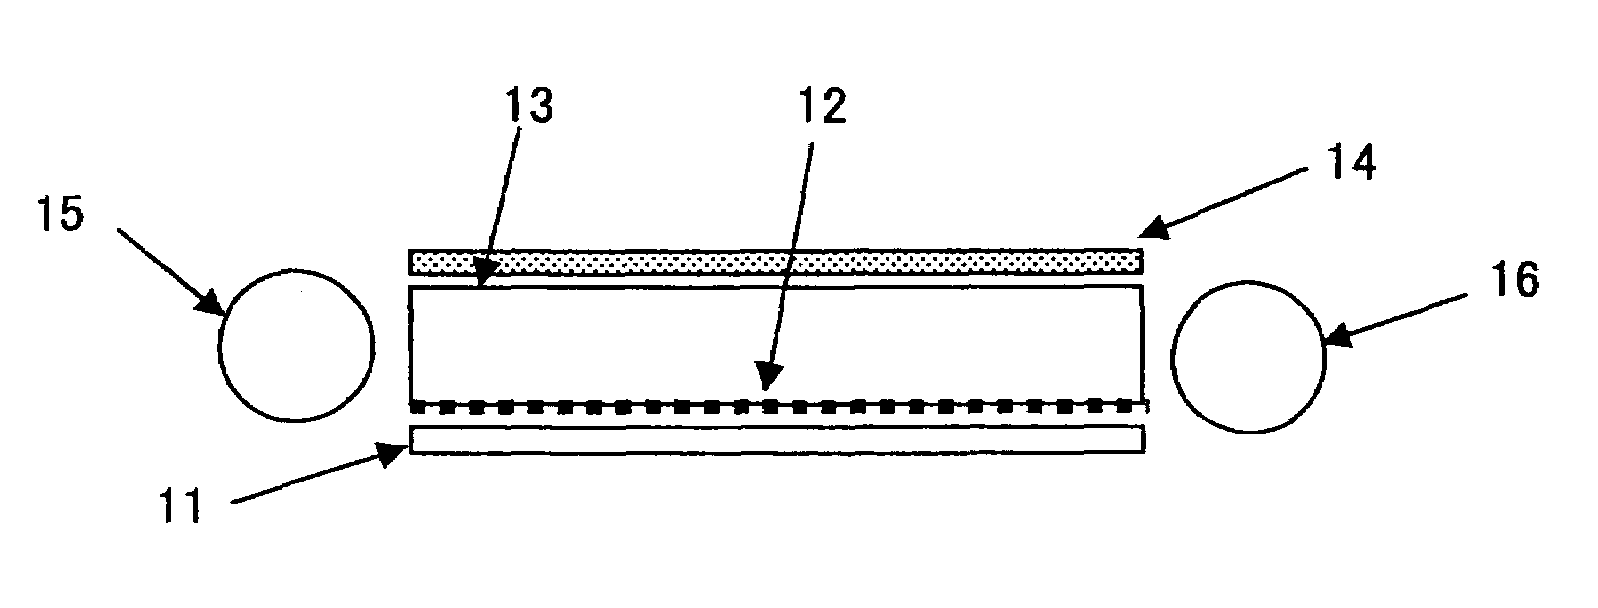 Light reflector and planar light source device